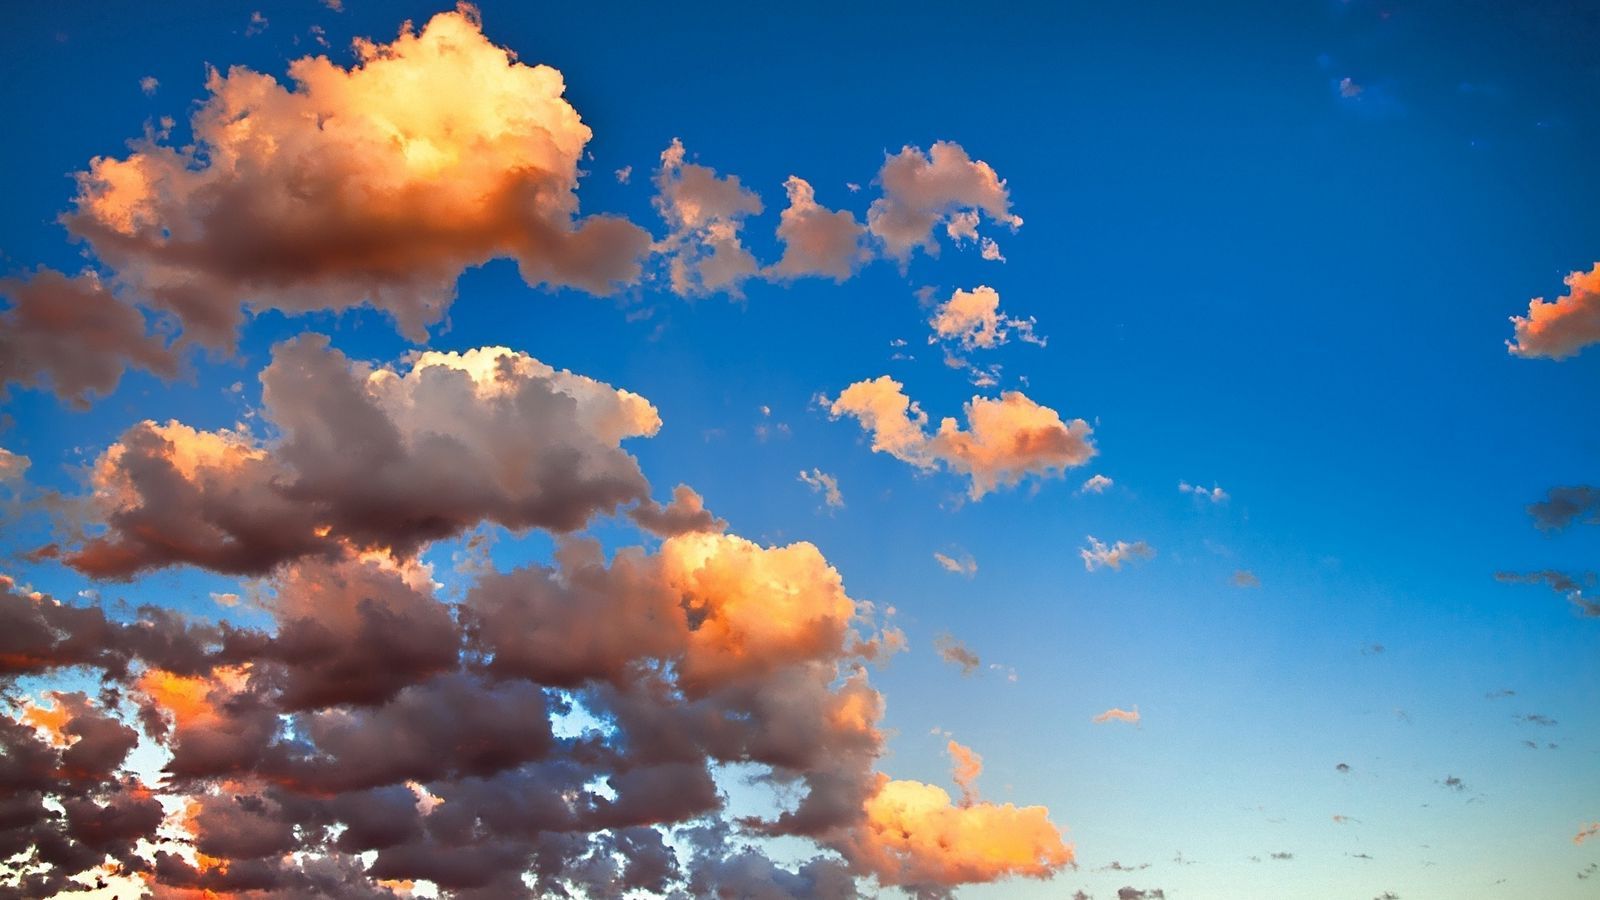 Download wallpaper 1600x900 clouds, colors, sky, gold, air, ease